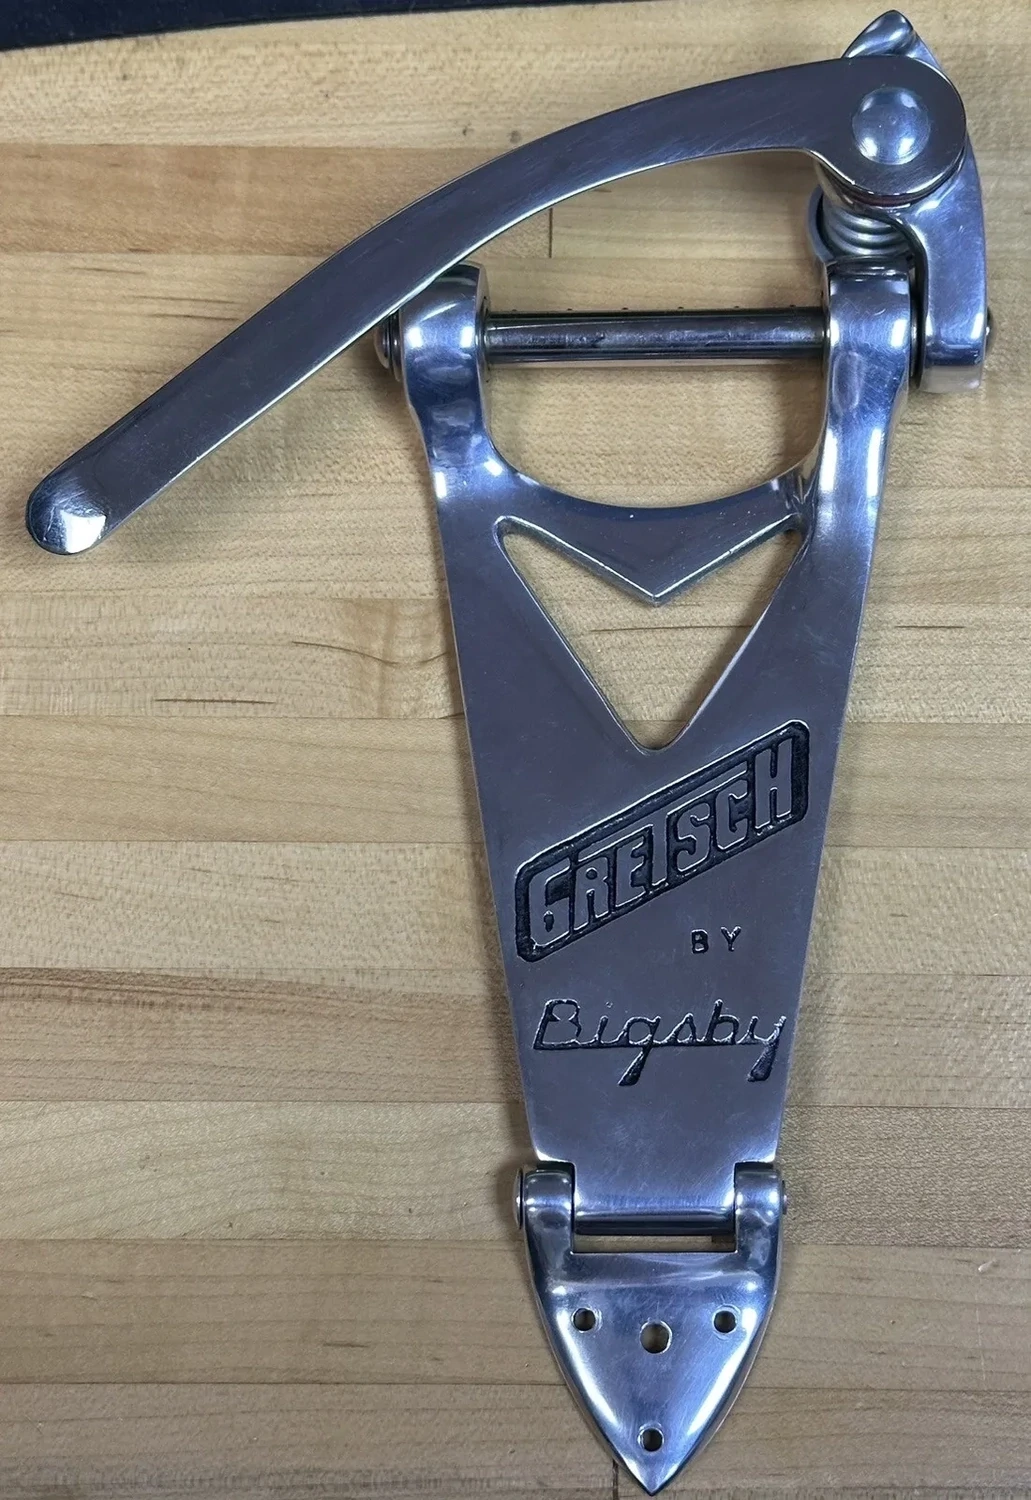 Gretsch B6 Bigsby For Electric Guitar Vintage Tailpiece